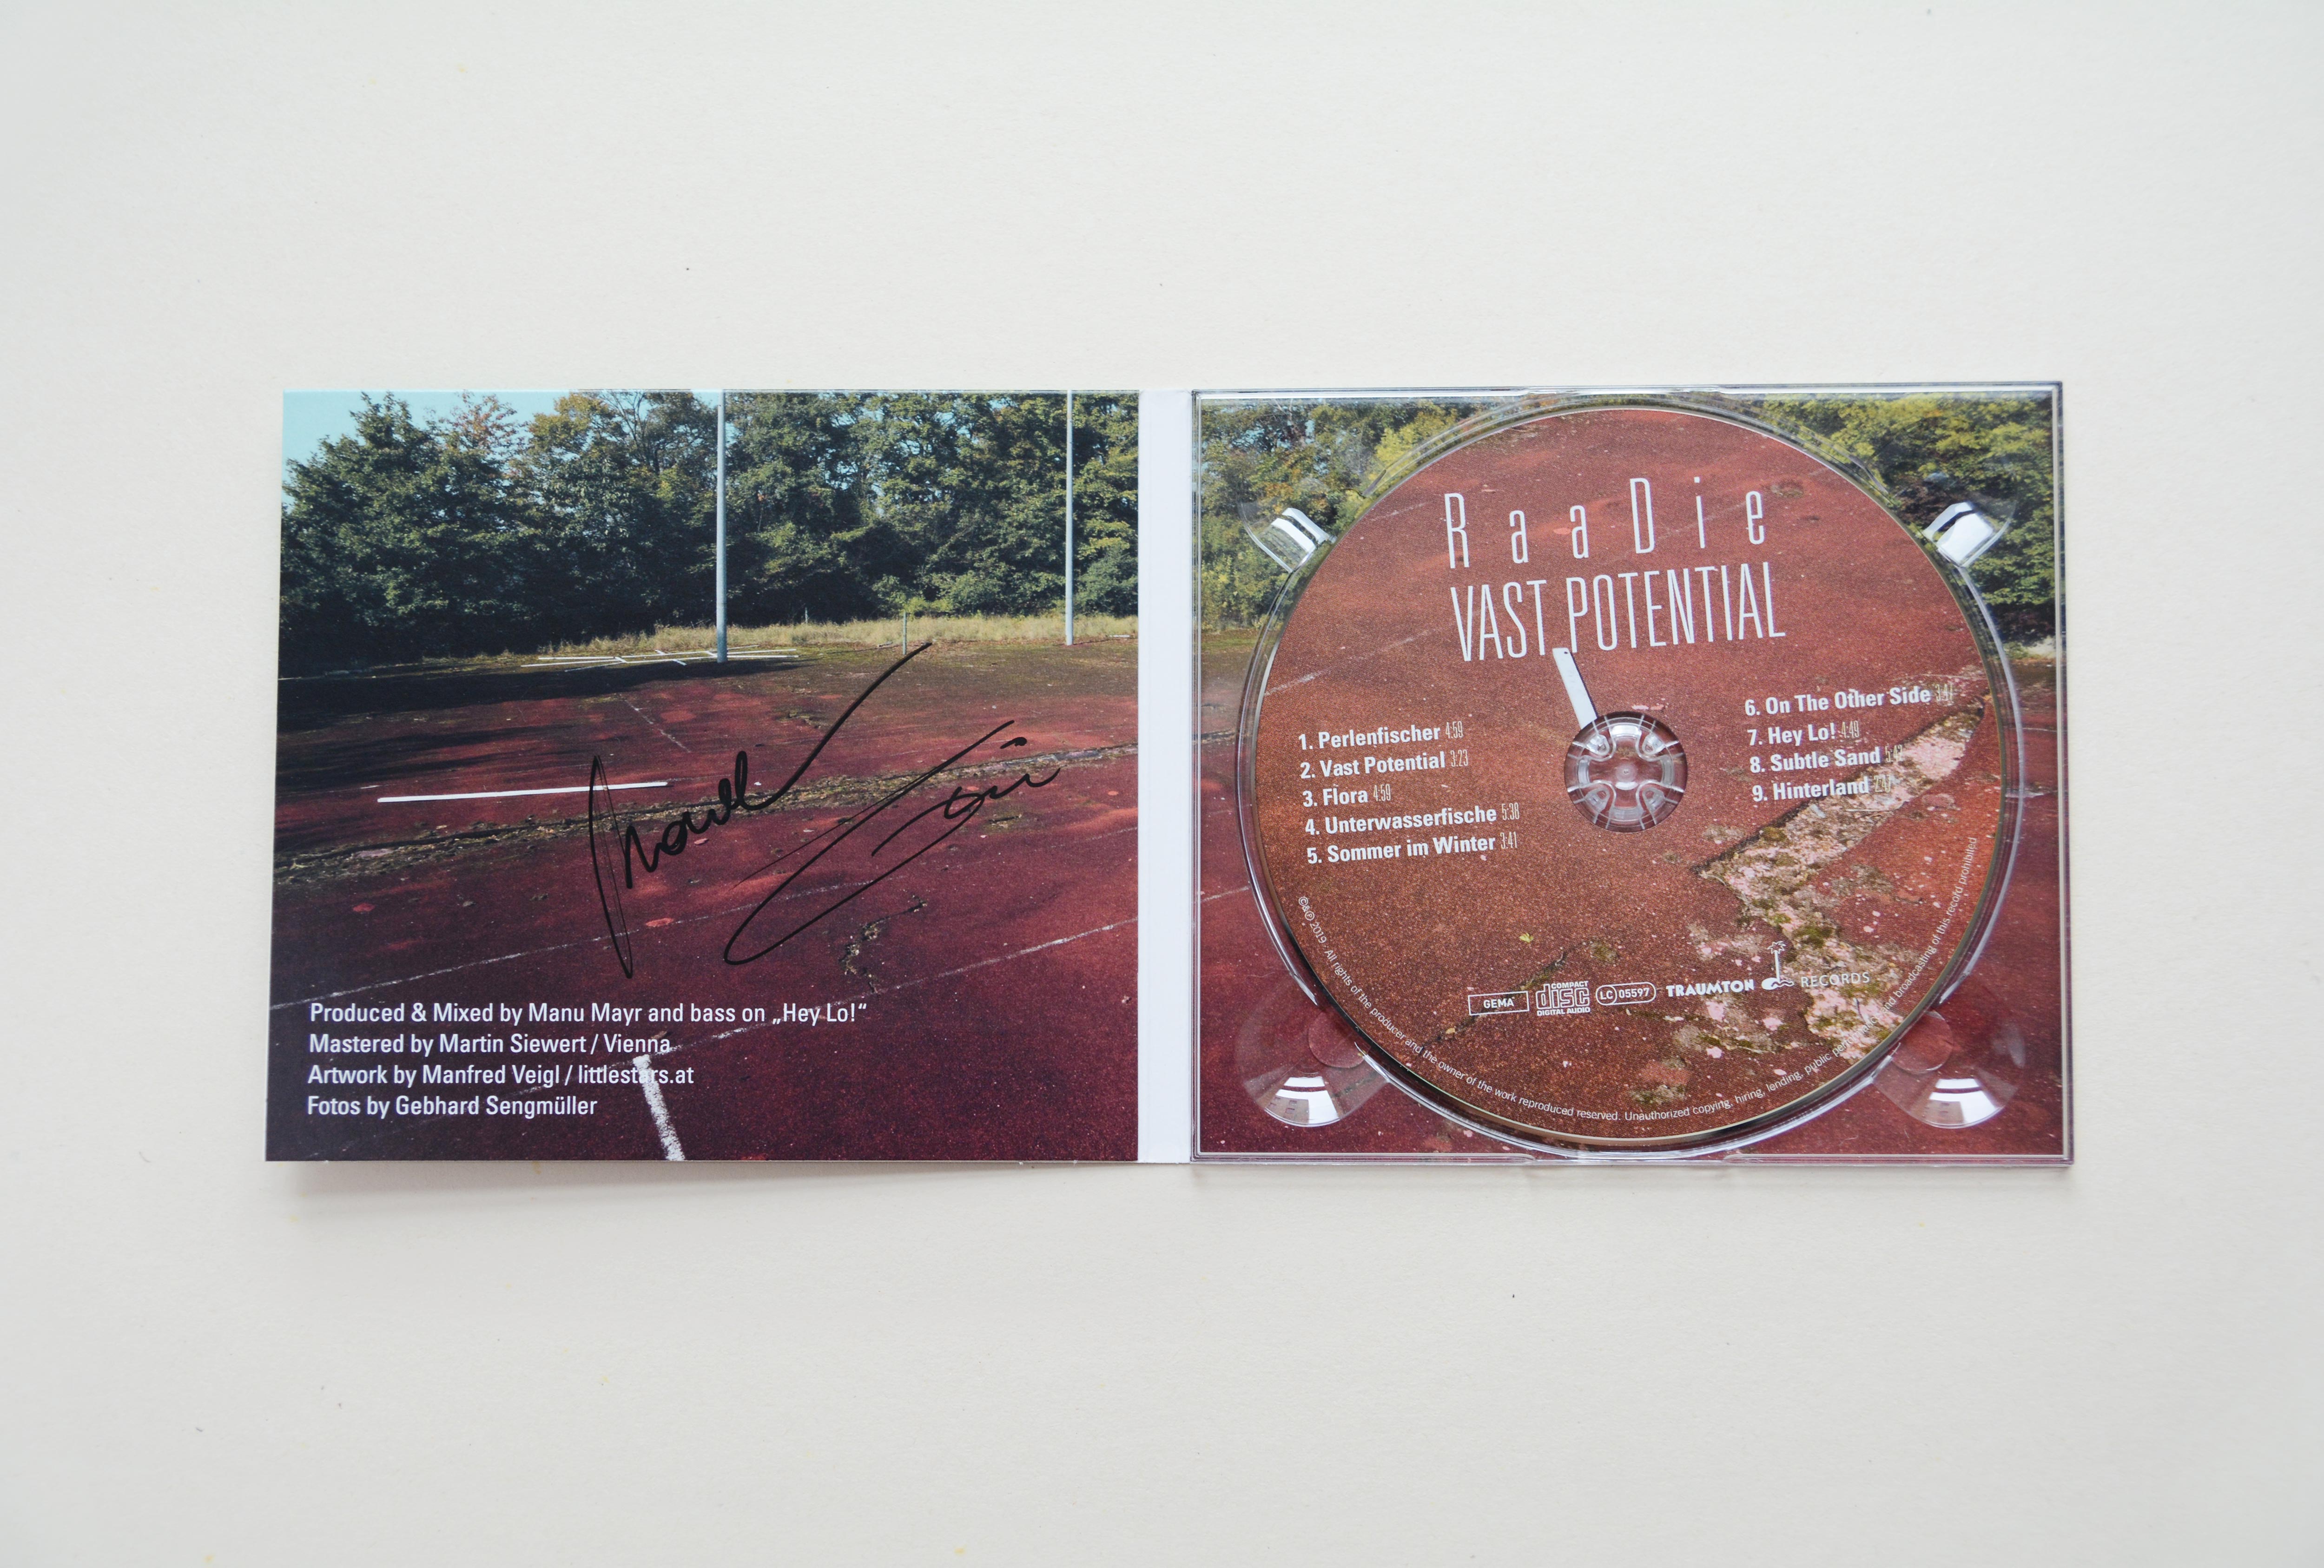 Opened CD scleeve. Left: Different shot of abandoned tennis court. Right: CD printed with detail-shot of red old tennis floor. Title and songtitles overlayed.